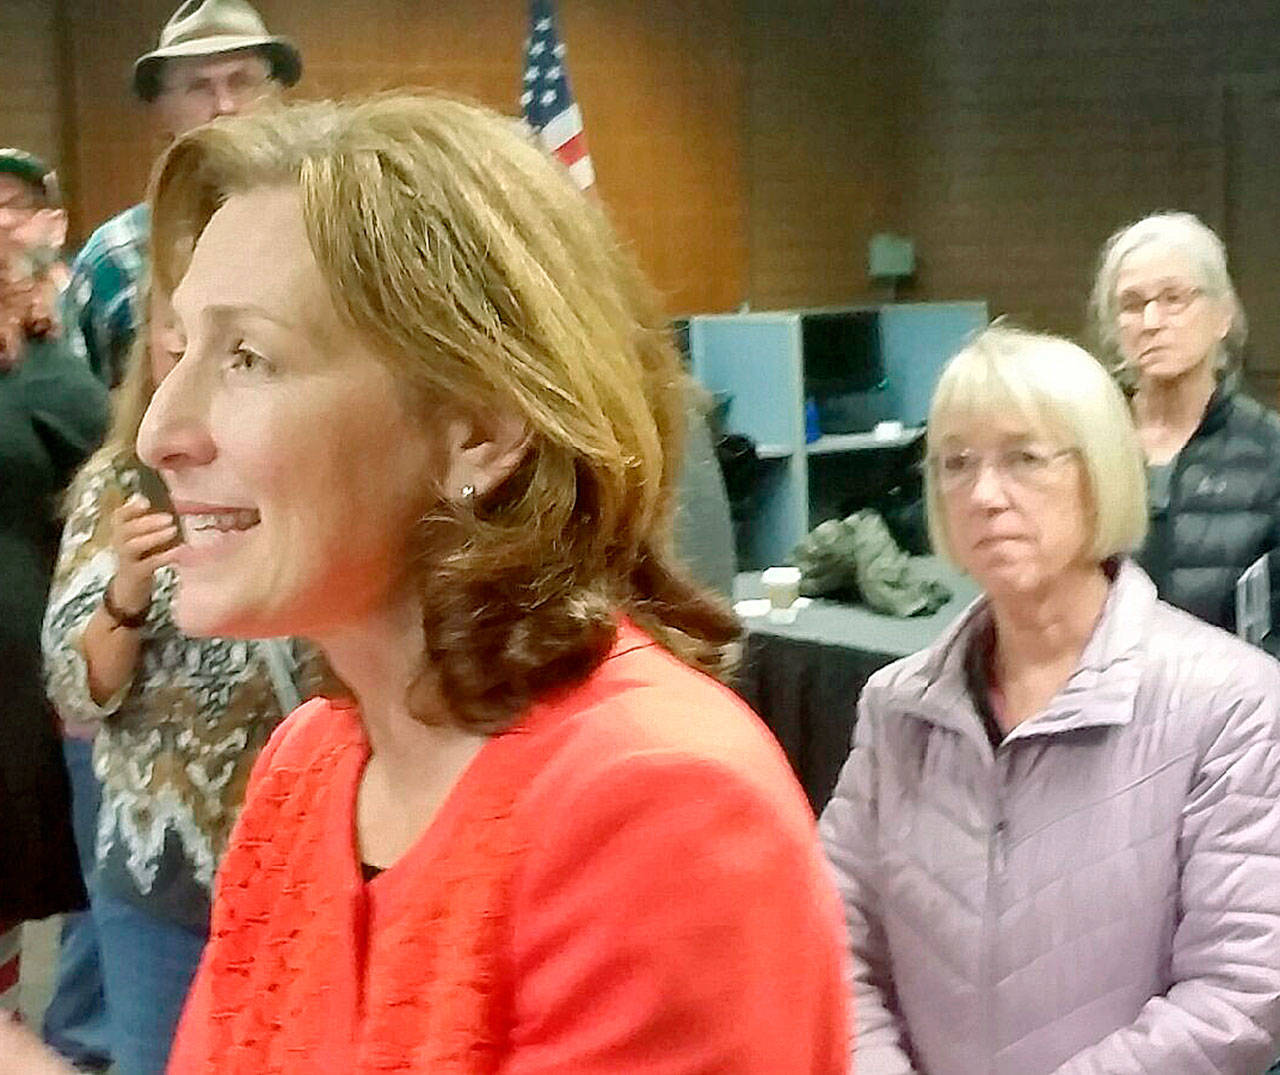 Democratic candidate Dr. Kim Schrier, locked in a tight race with Republican Dino Rossi for the U.S. 8th Congressional District seat, talks to campaign volunteers as U.S. Sen. Patty Murray listens behind her at the Aerospace Machinist’s Hall in Auburn on Monday afternoon. ROBERT WHALE, Auburn Reporter